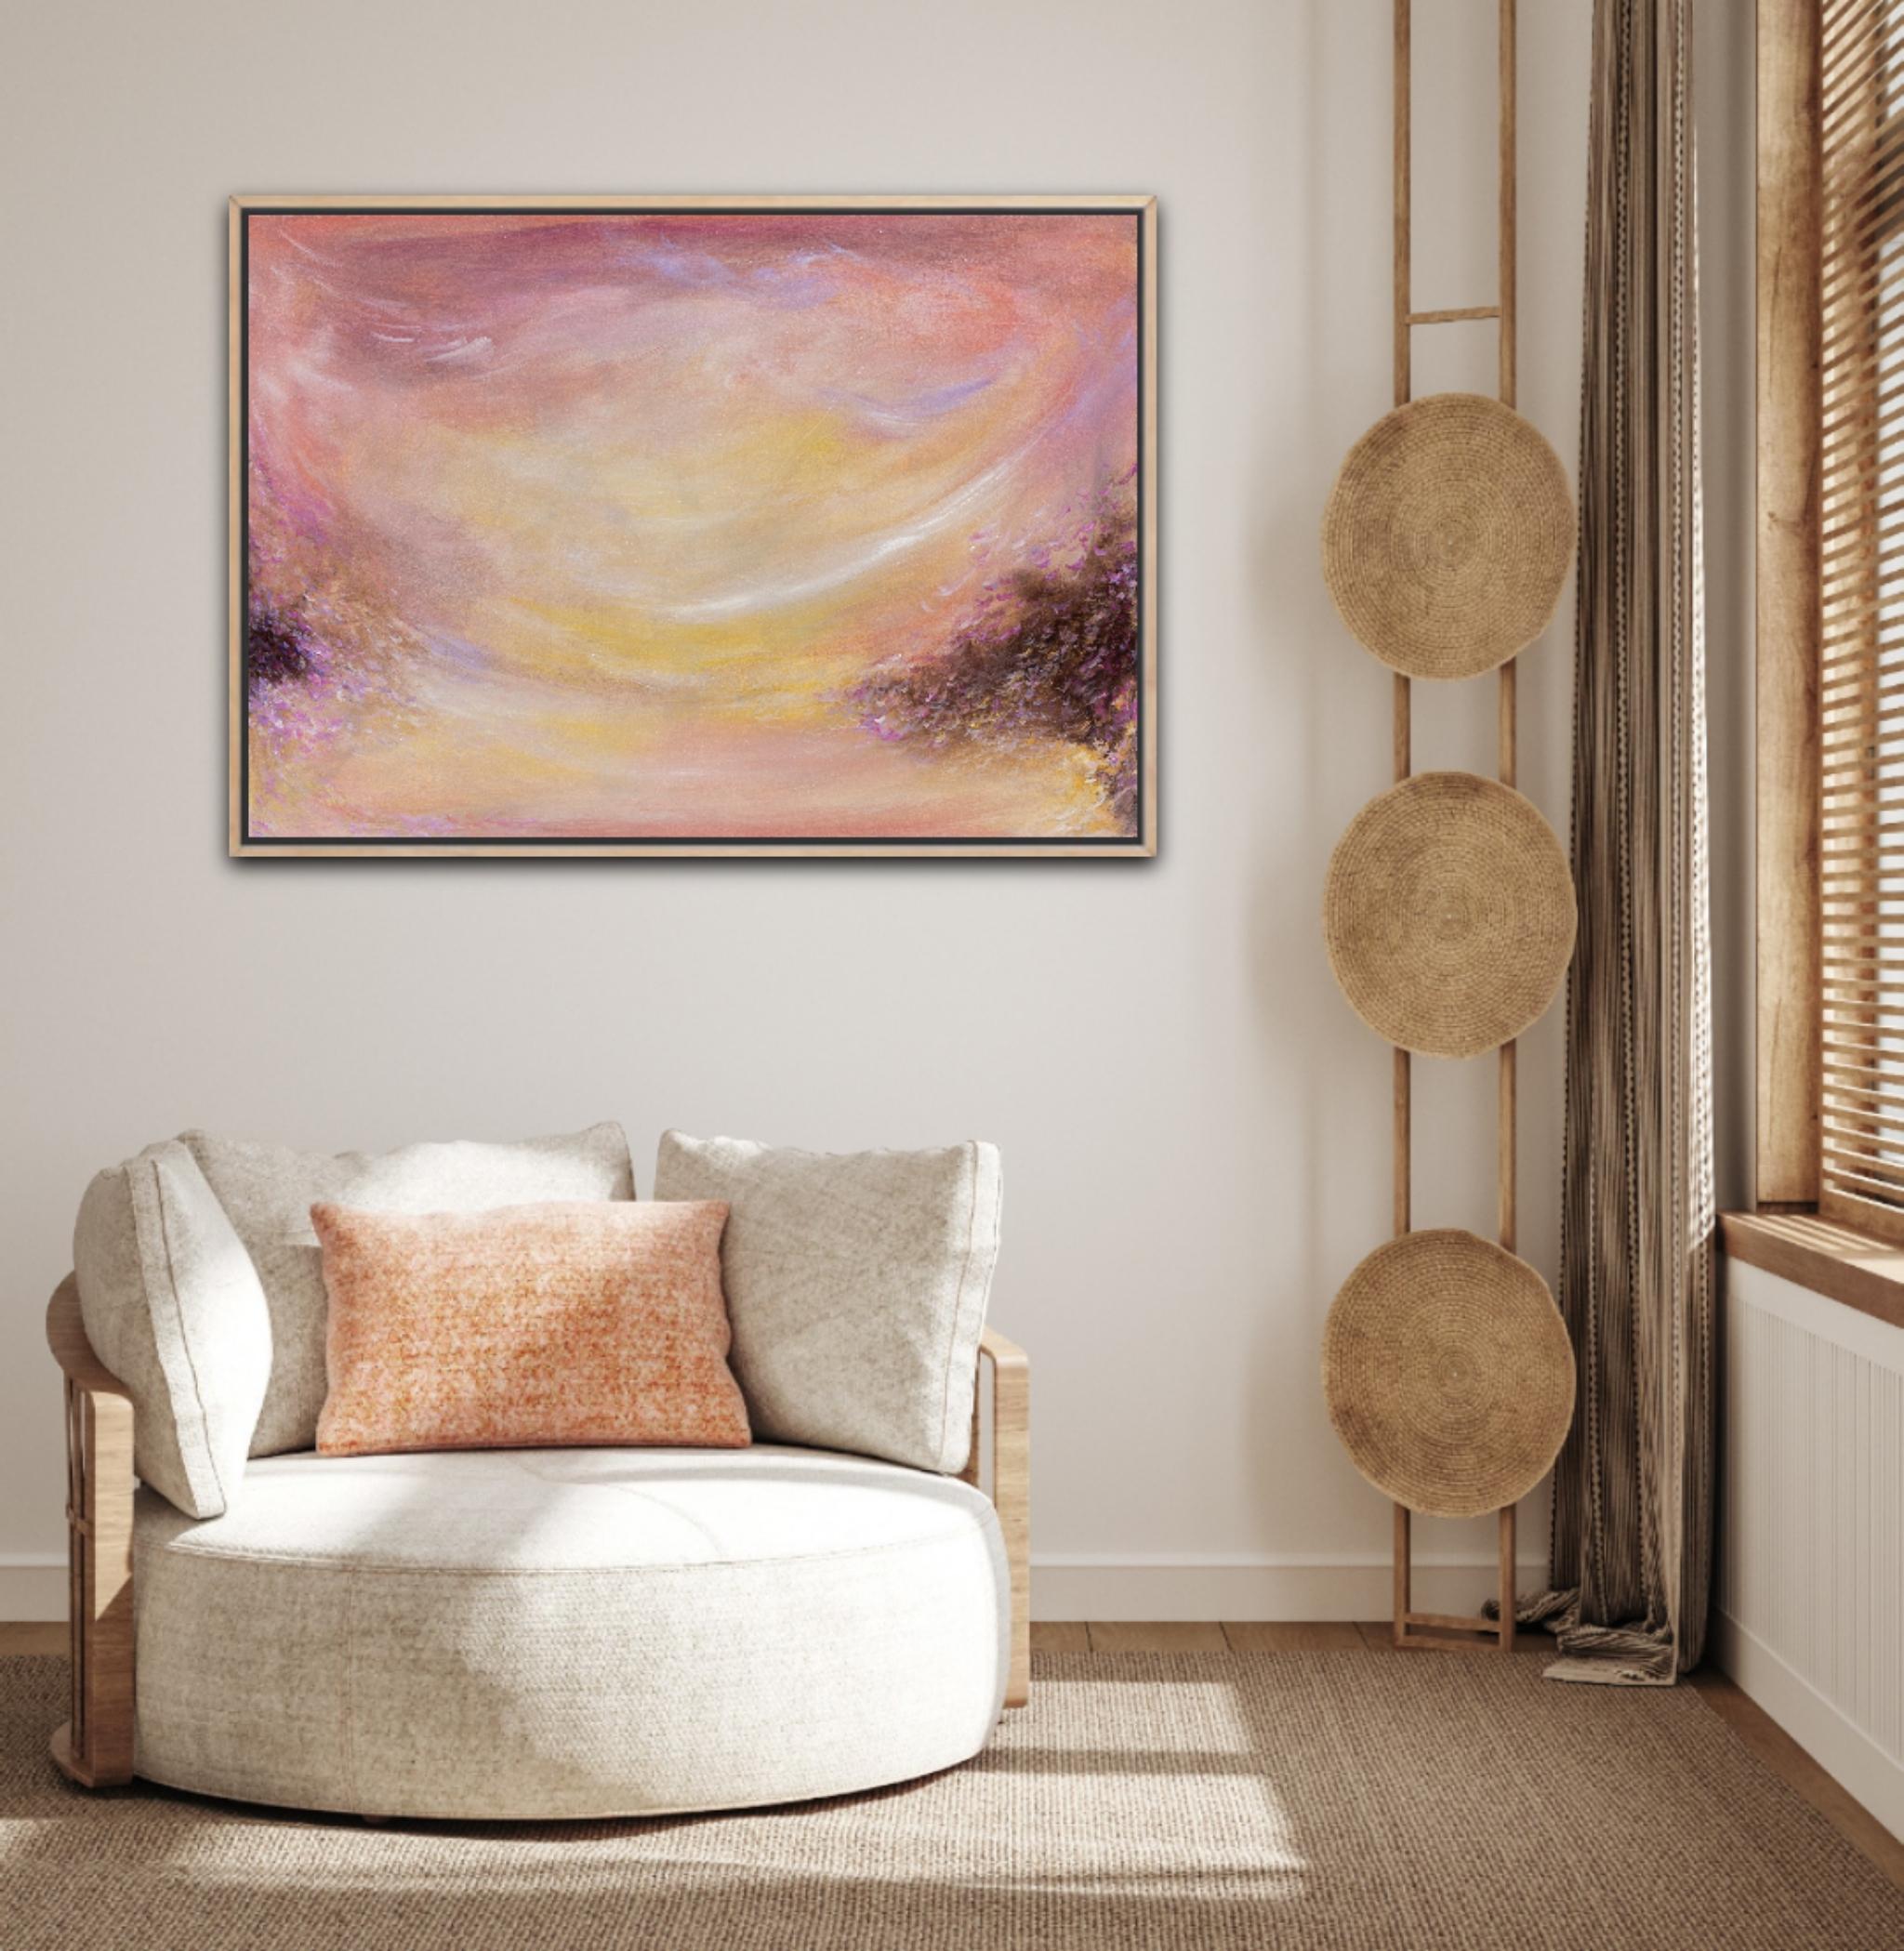 Ballad of the wind - Abstract impressionist warm sunset painting For Sale 4